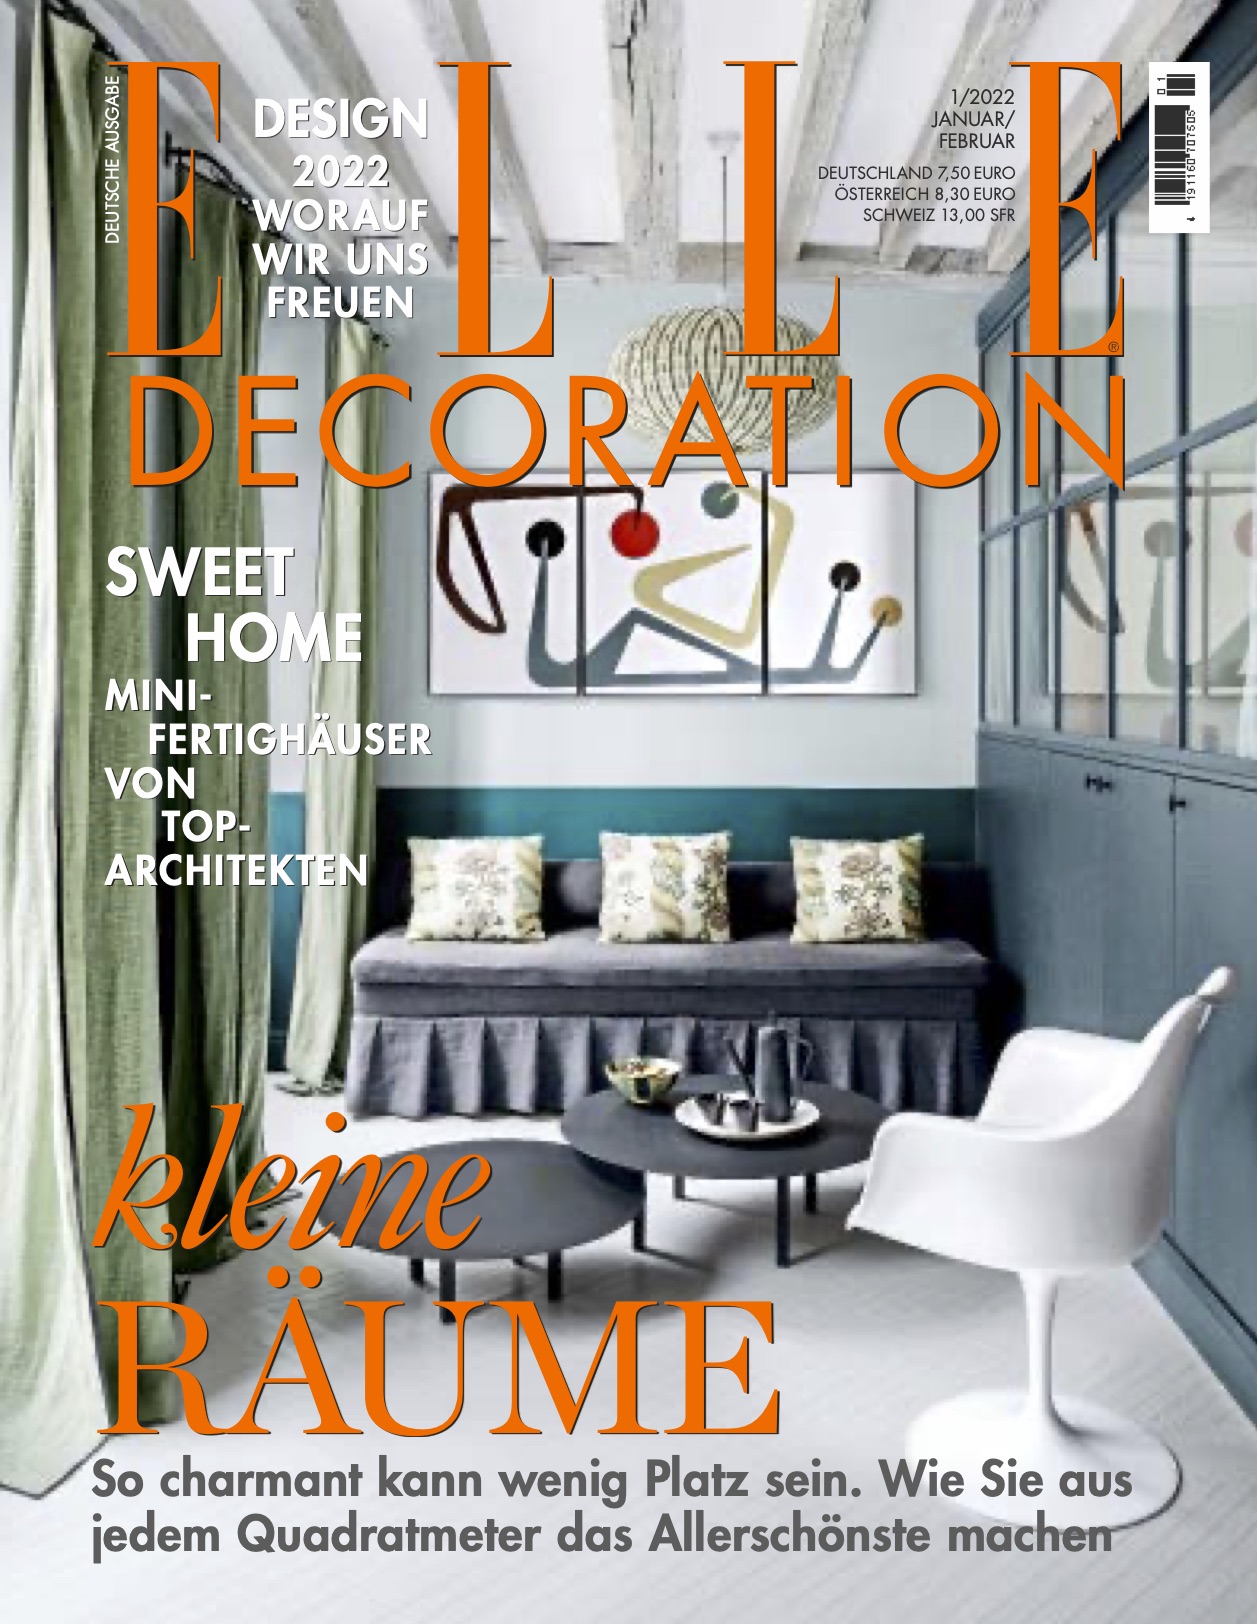 Elle Decoration features Clay House - Clayworks